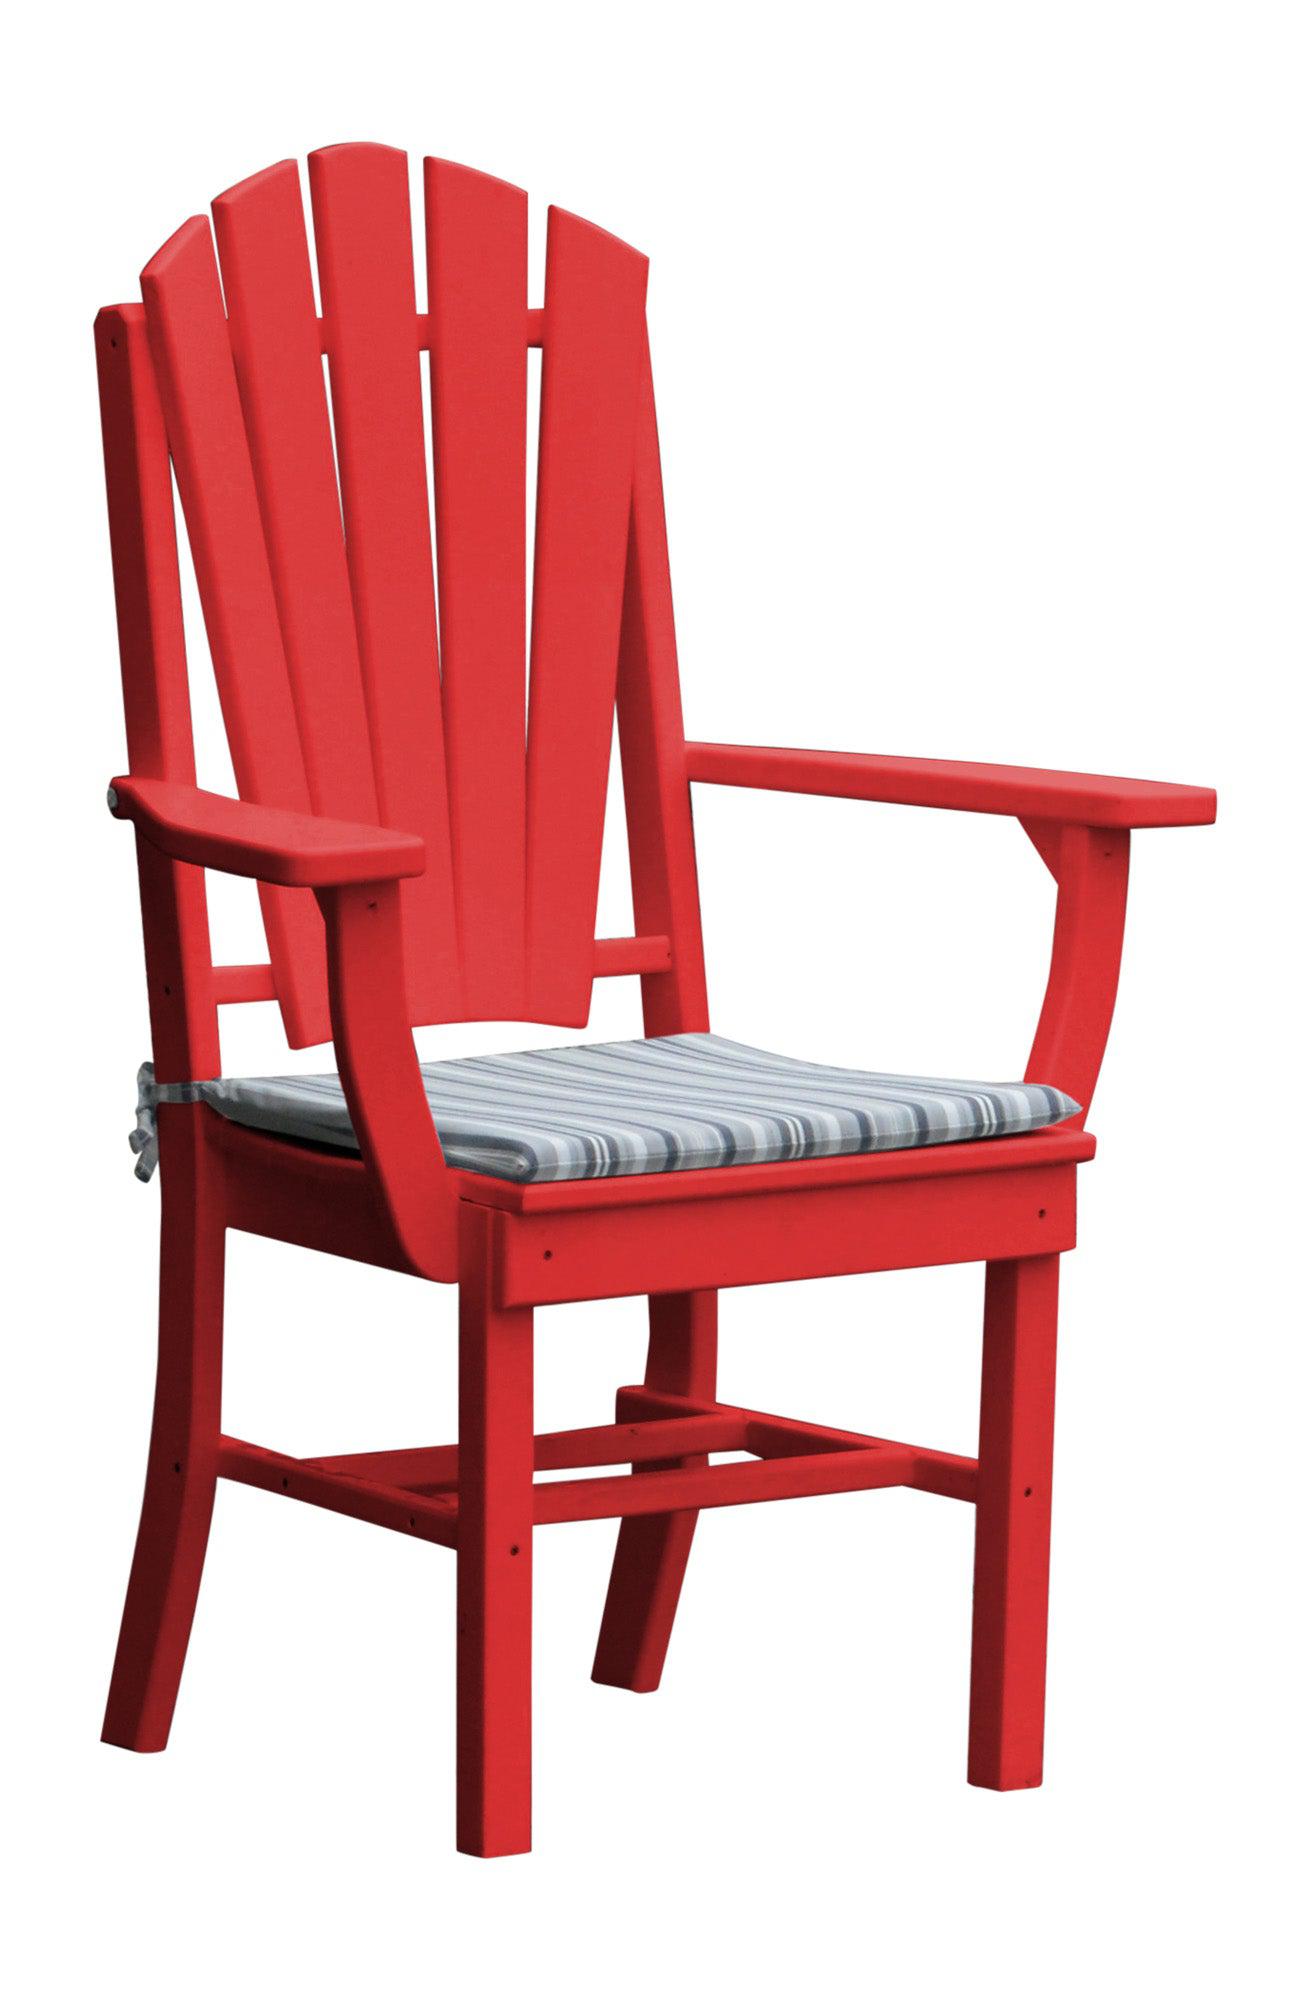 A&L Furniture Company Recycled Plastic Adirondack Dining Chair w/Arms - LEAD TIME TO SHIP 10 BUSINESS DAYS